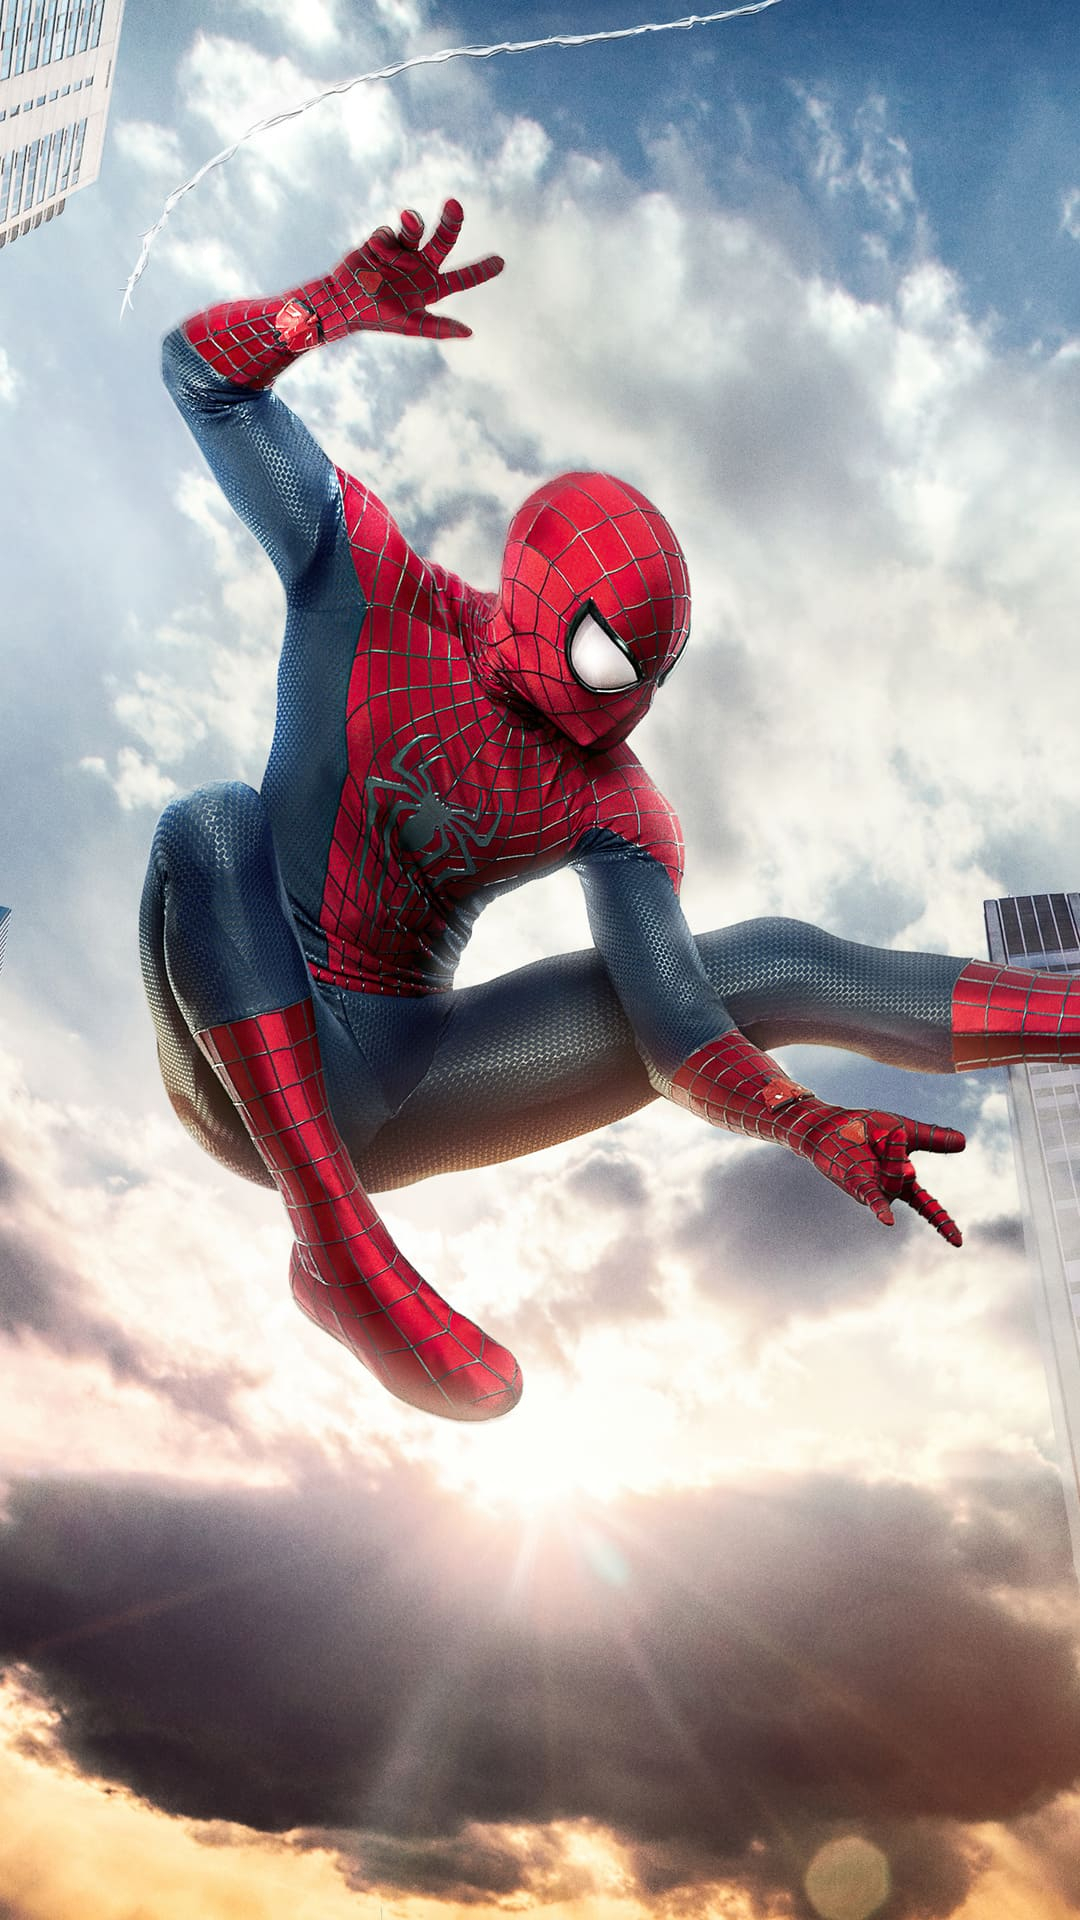 1080x1920 Top 50+ Spider Man Wallpapers [ New \u0026 Latest